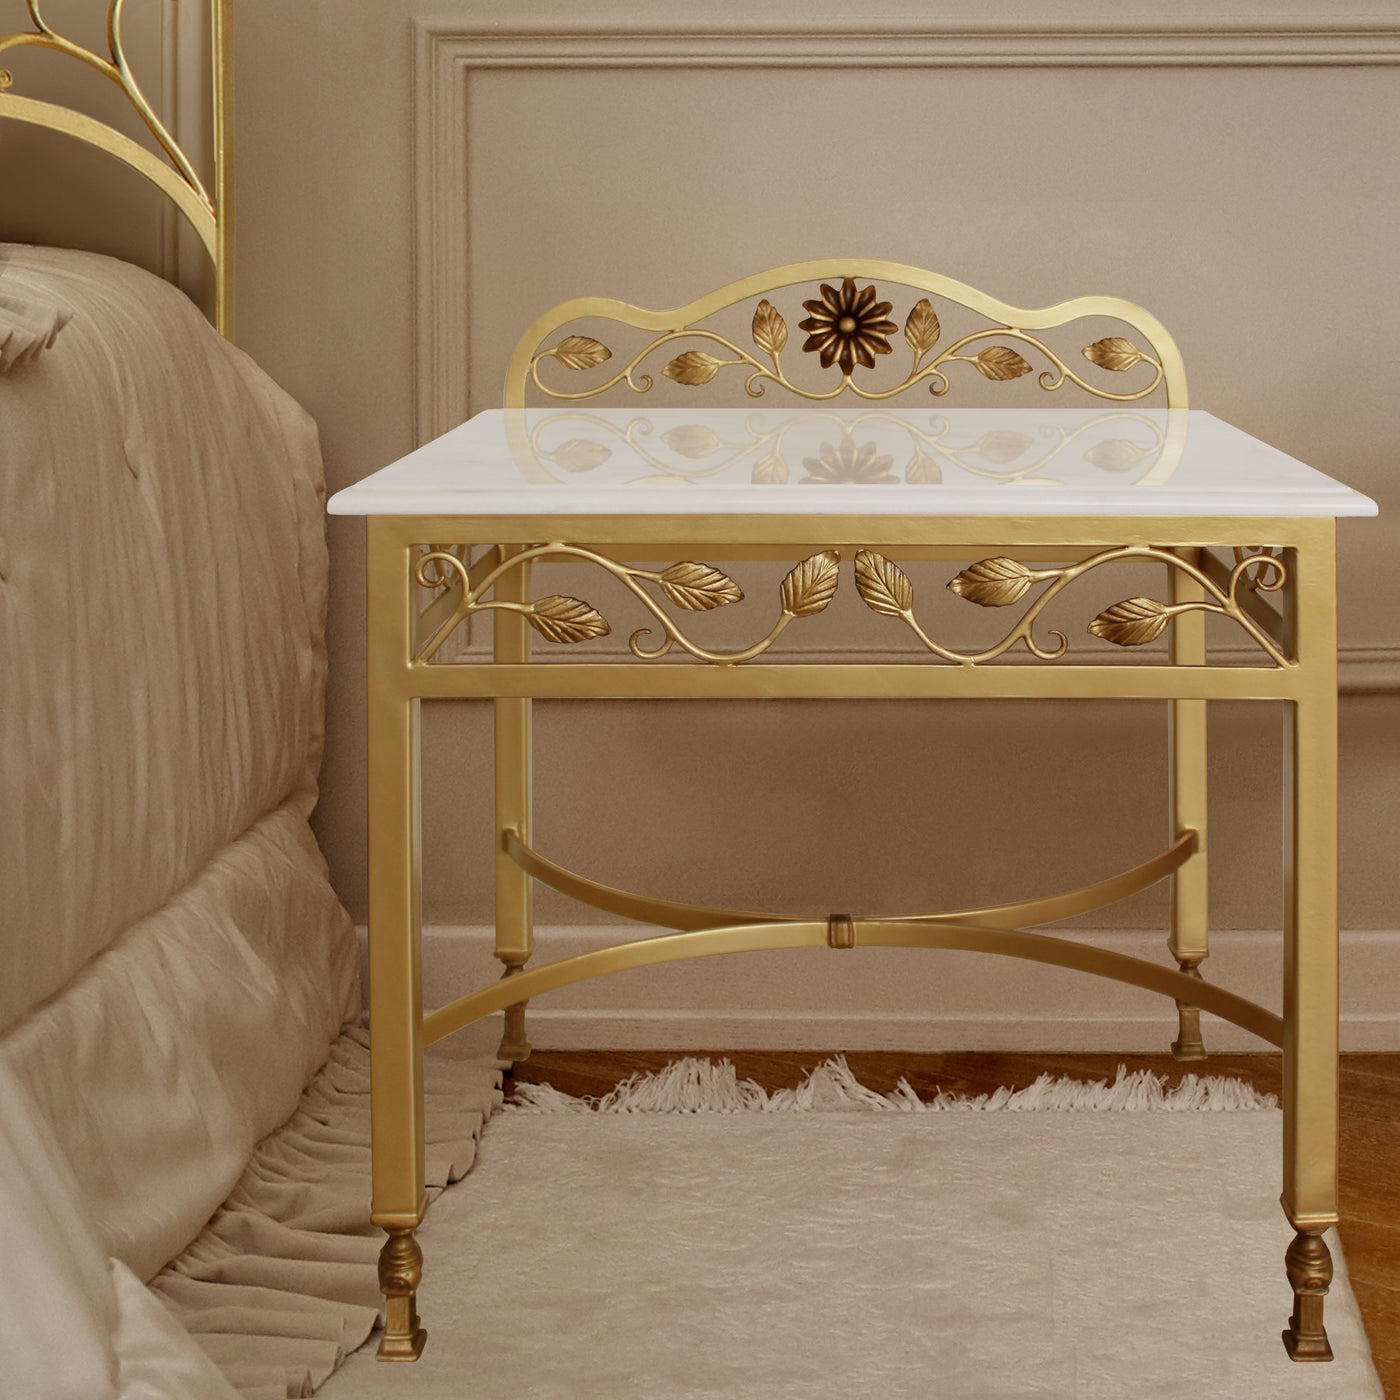 Luxurious wrought iron bedside table inspired by nature painted in an antique gold finish